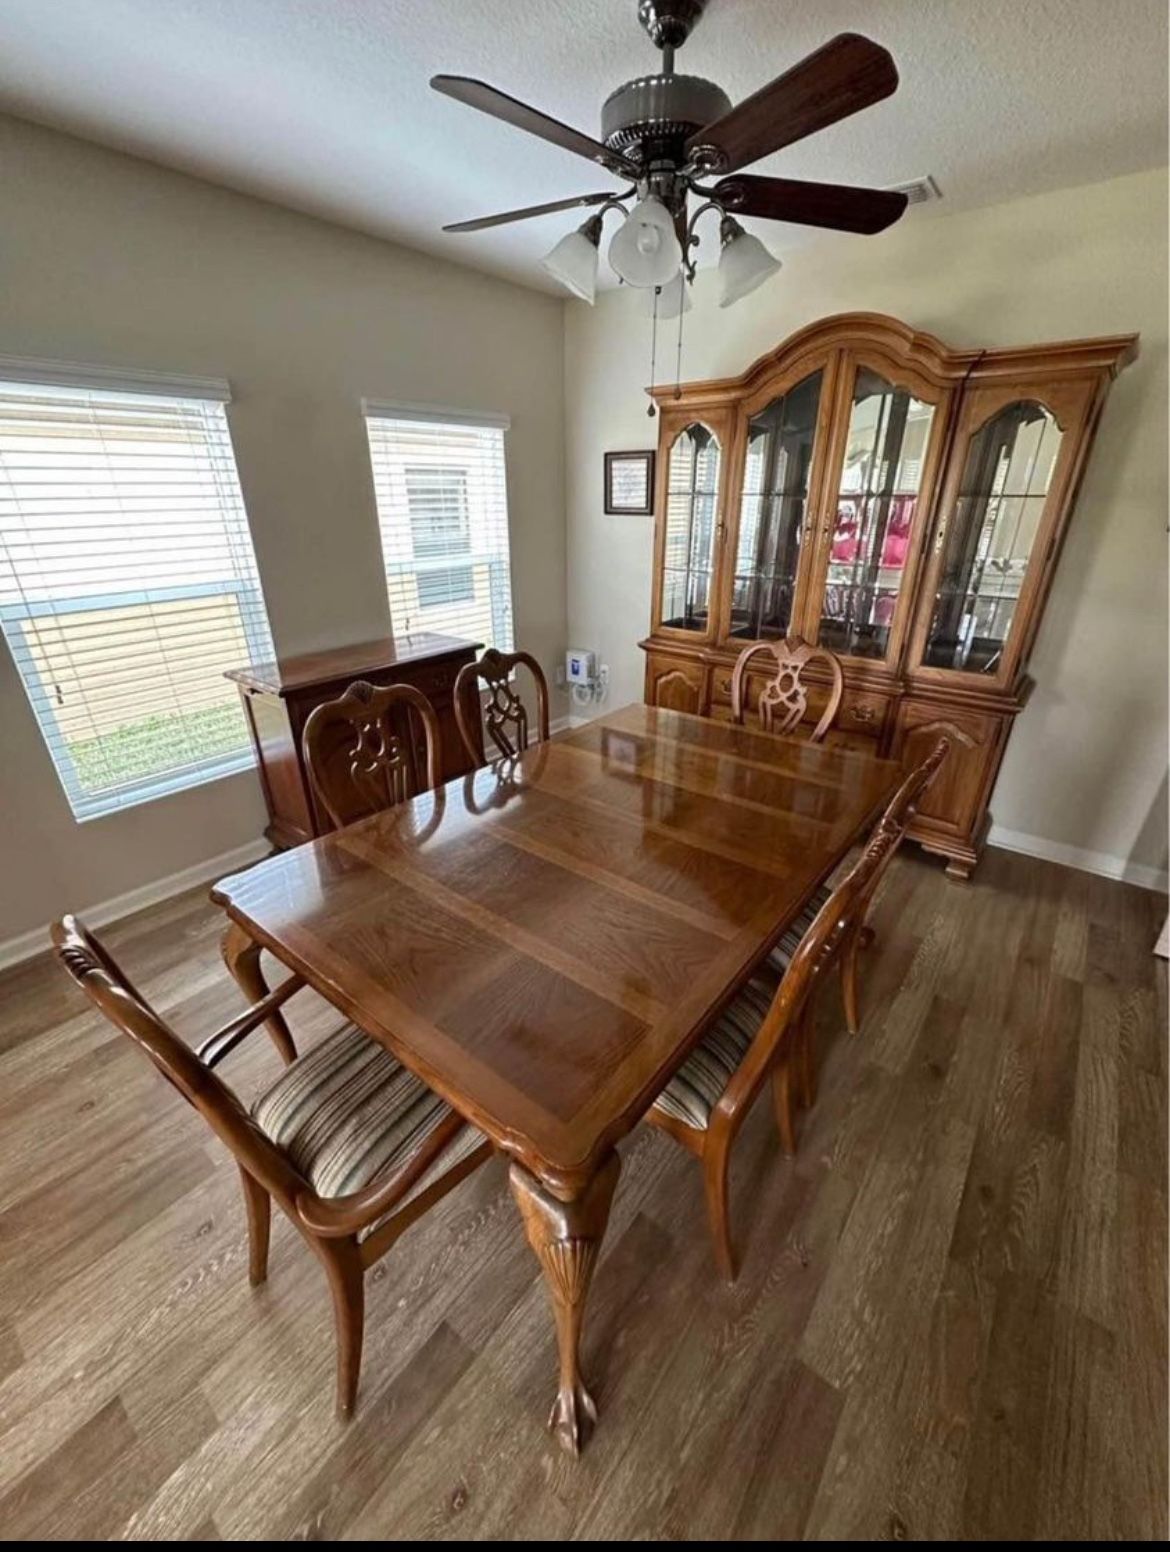 DINING ROOM SET TABLE